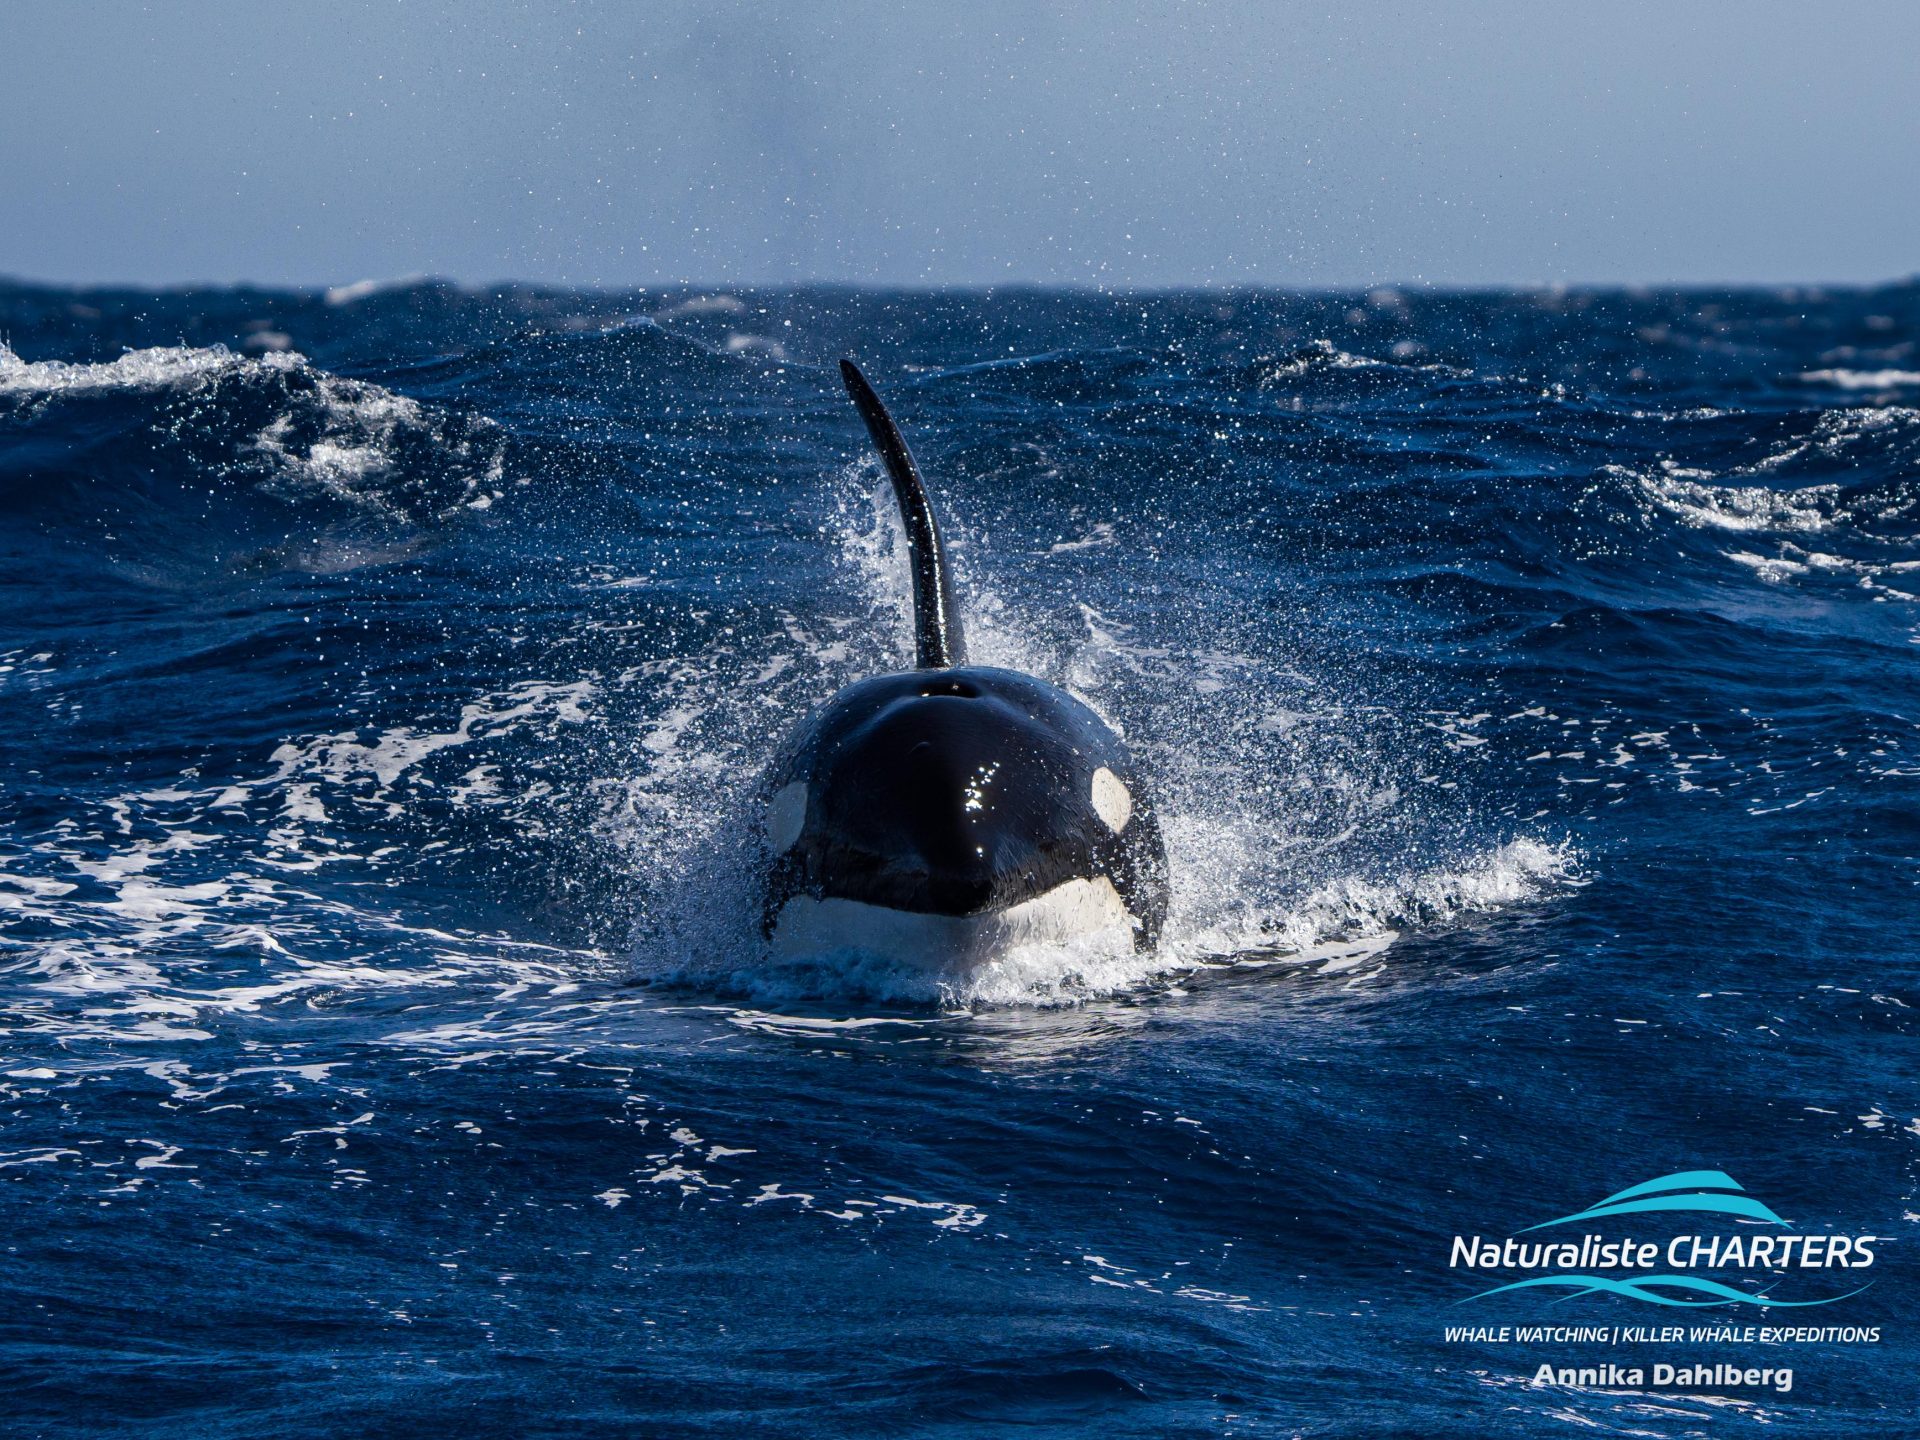 Orcas have streamlined body shapes which allow them to glide through the water with ease, reaching a maximum speed of 60kms/hour